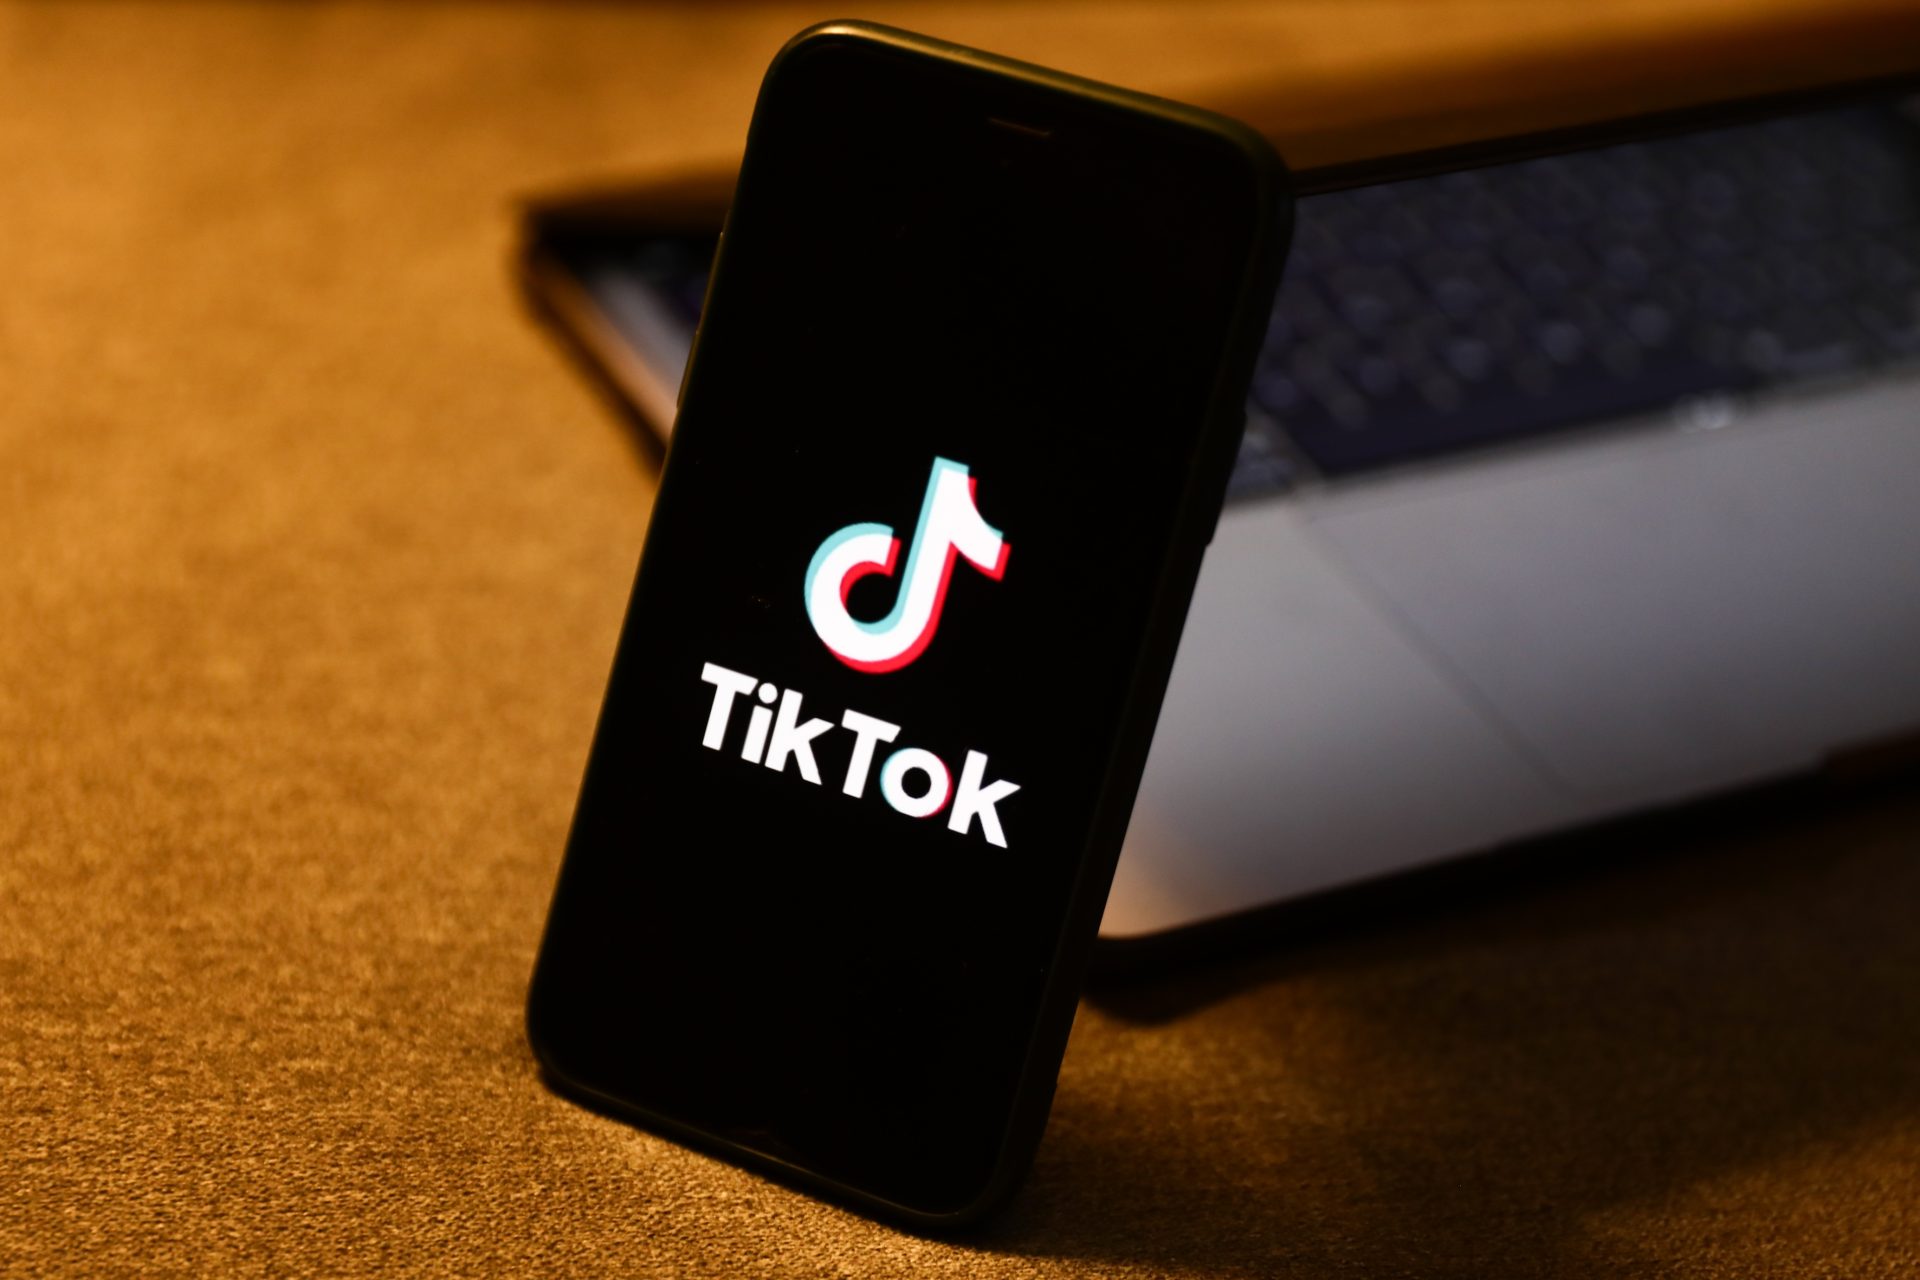 Doctors Are Warning Women To Take Advice From Licensed Professionals As More People Are Using TikTok Videos To Self-Diagnose Themselves With ADHD